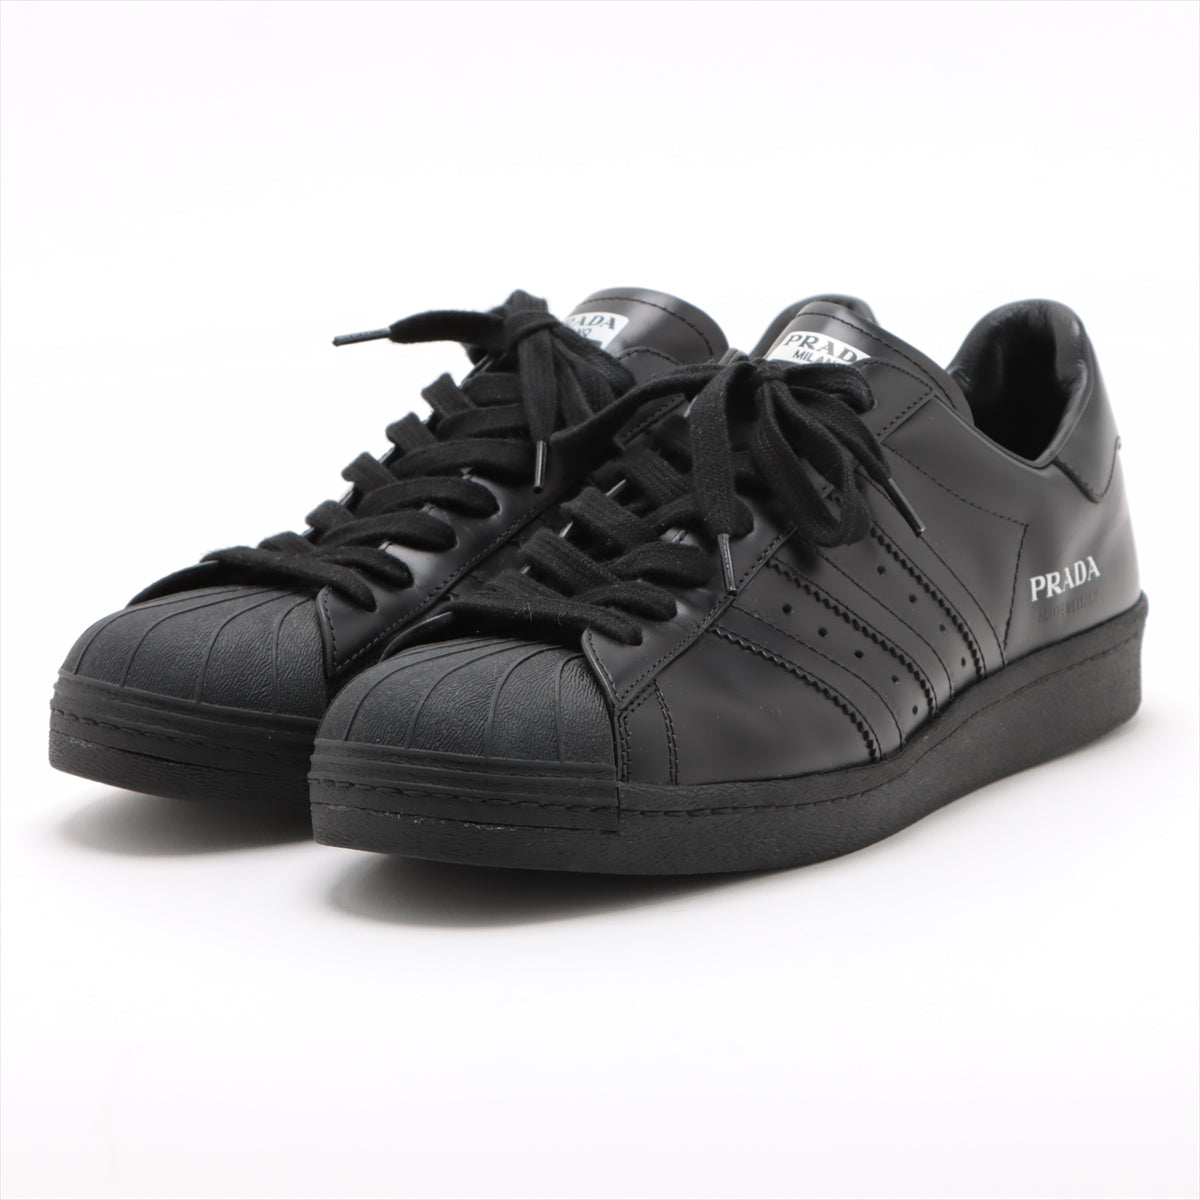 Prada x Adidas superstars Leather Sneakers 28.5㎝ Men's Black FW6679 There is a box